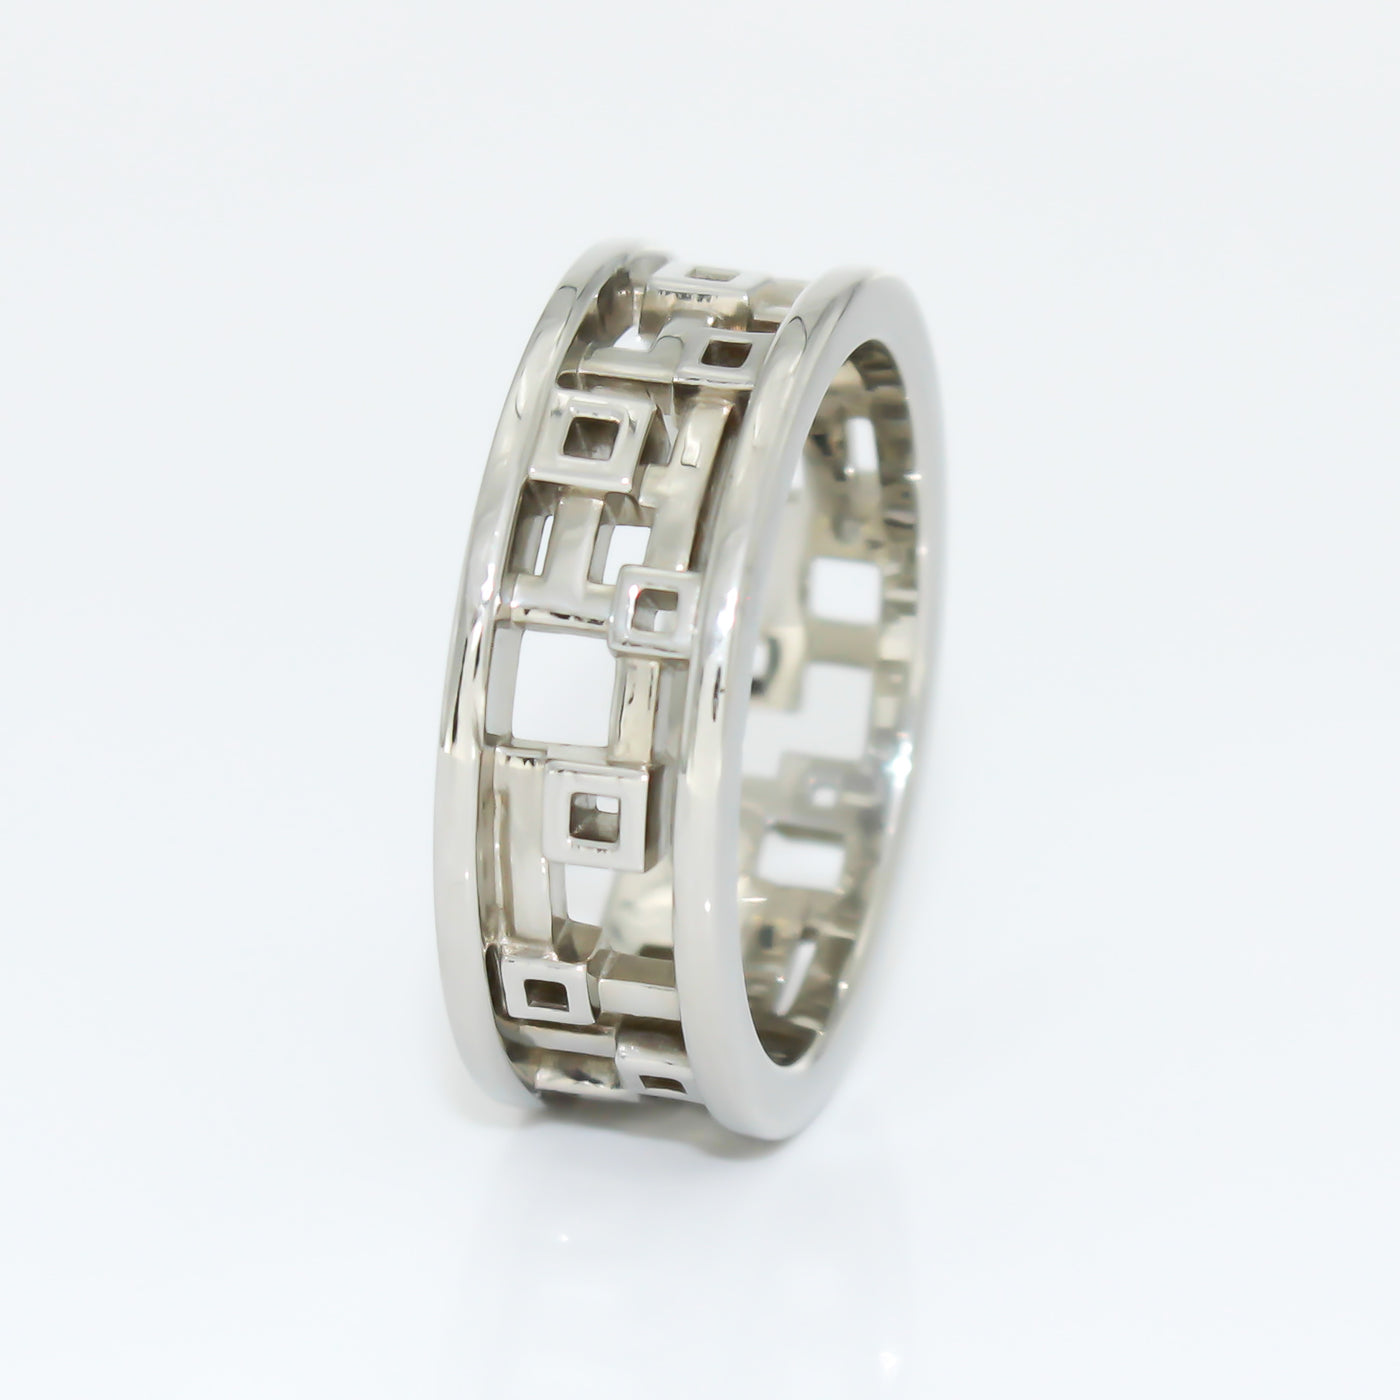 14K White Gold Band with Square Graphic Motif